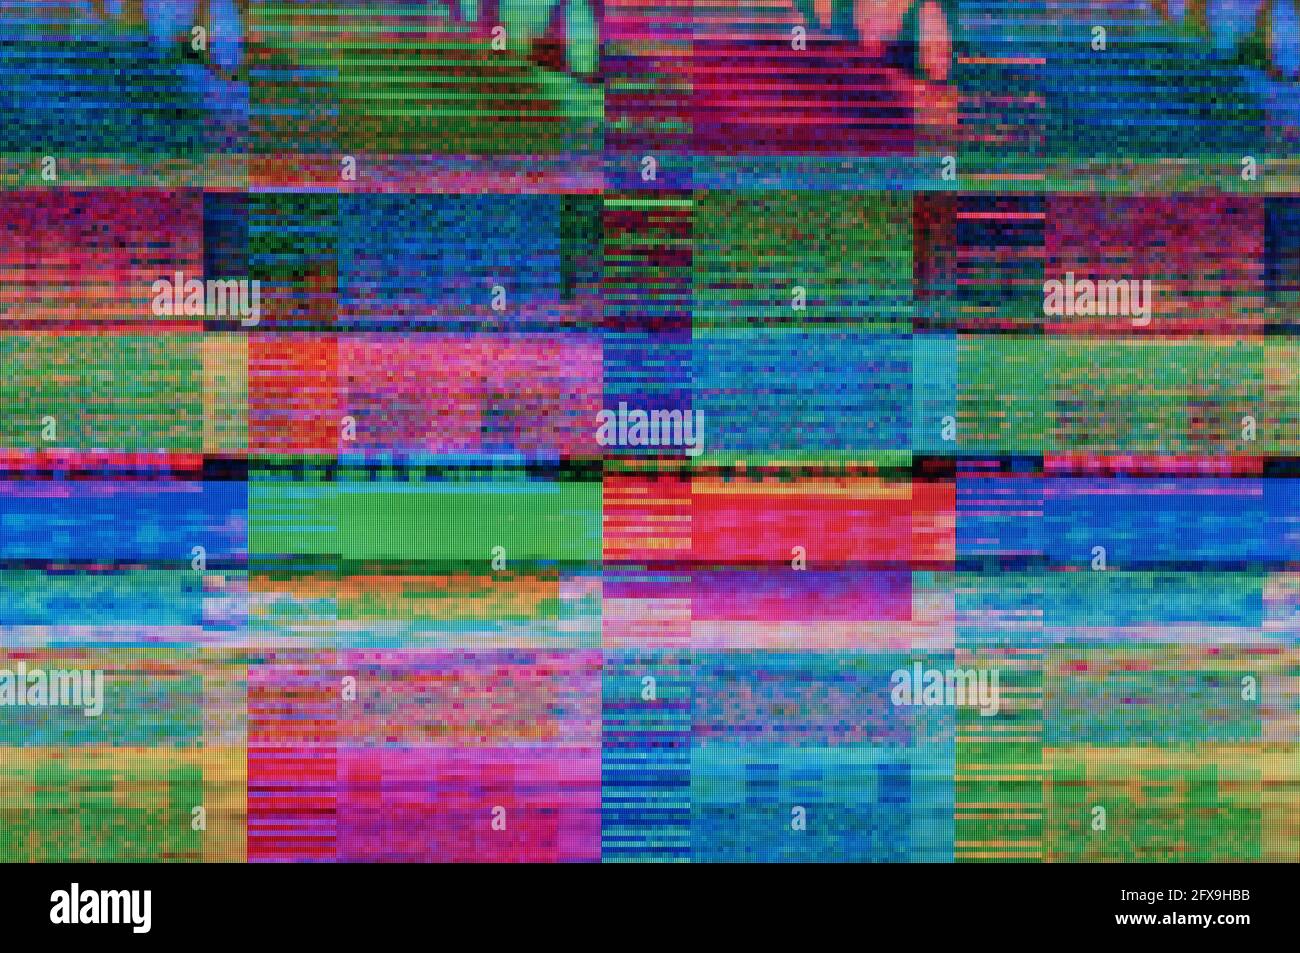 Abstract background of a digital glitch. Stock Photo